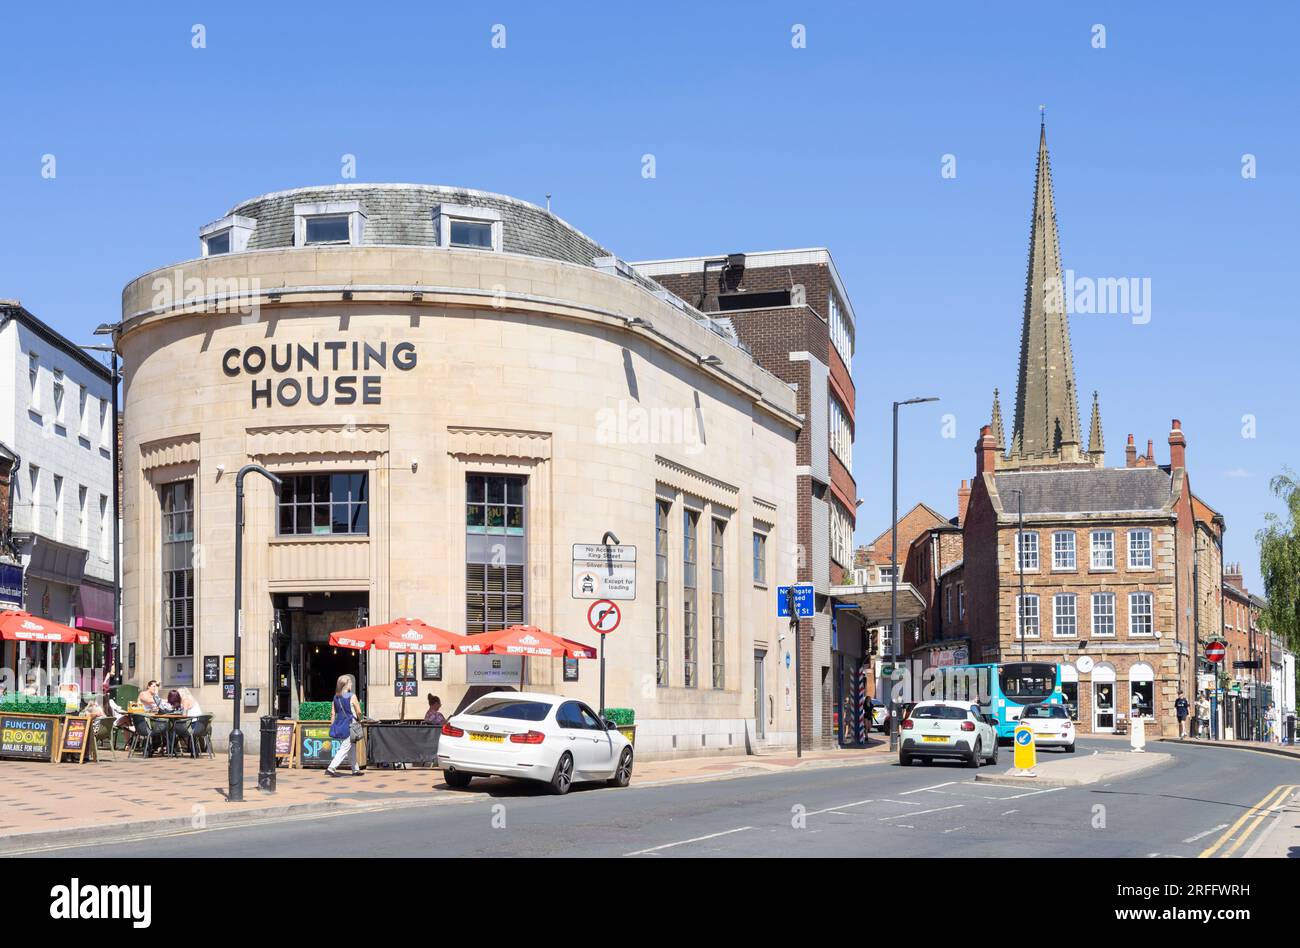 Wakefield le pub Counting House sur Westgate Wakefield centre ville Yorkshire Angleterre UK GB Europe Banque D'Images